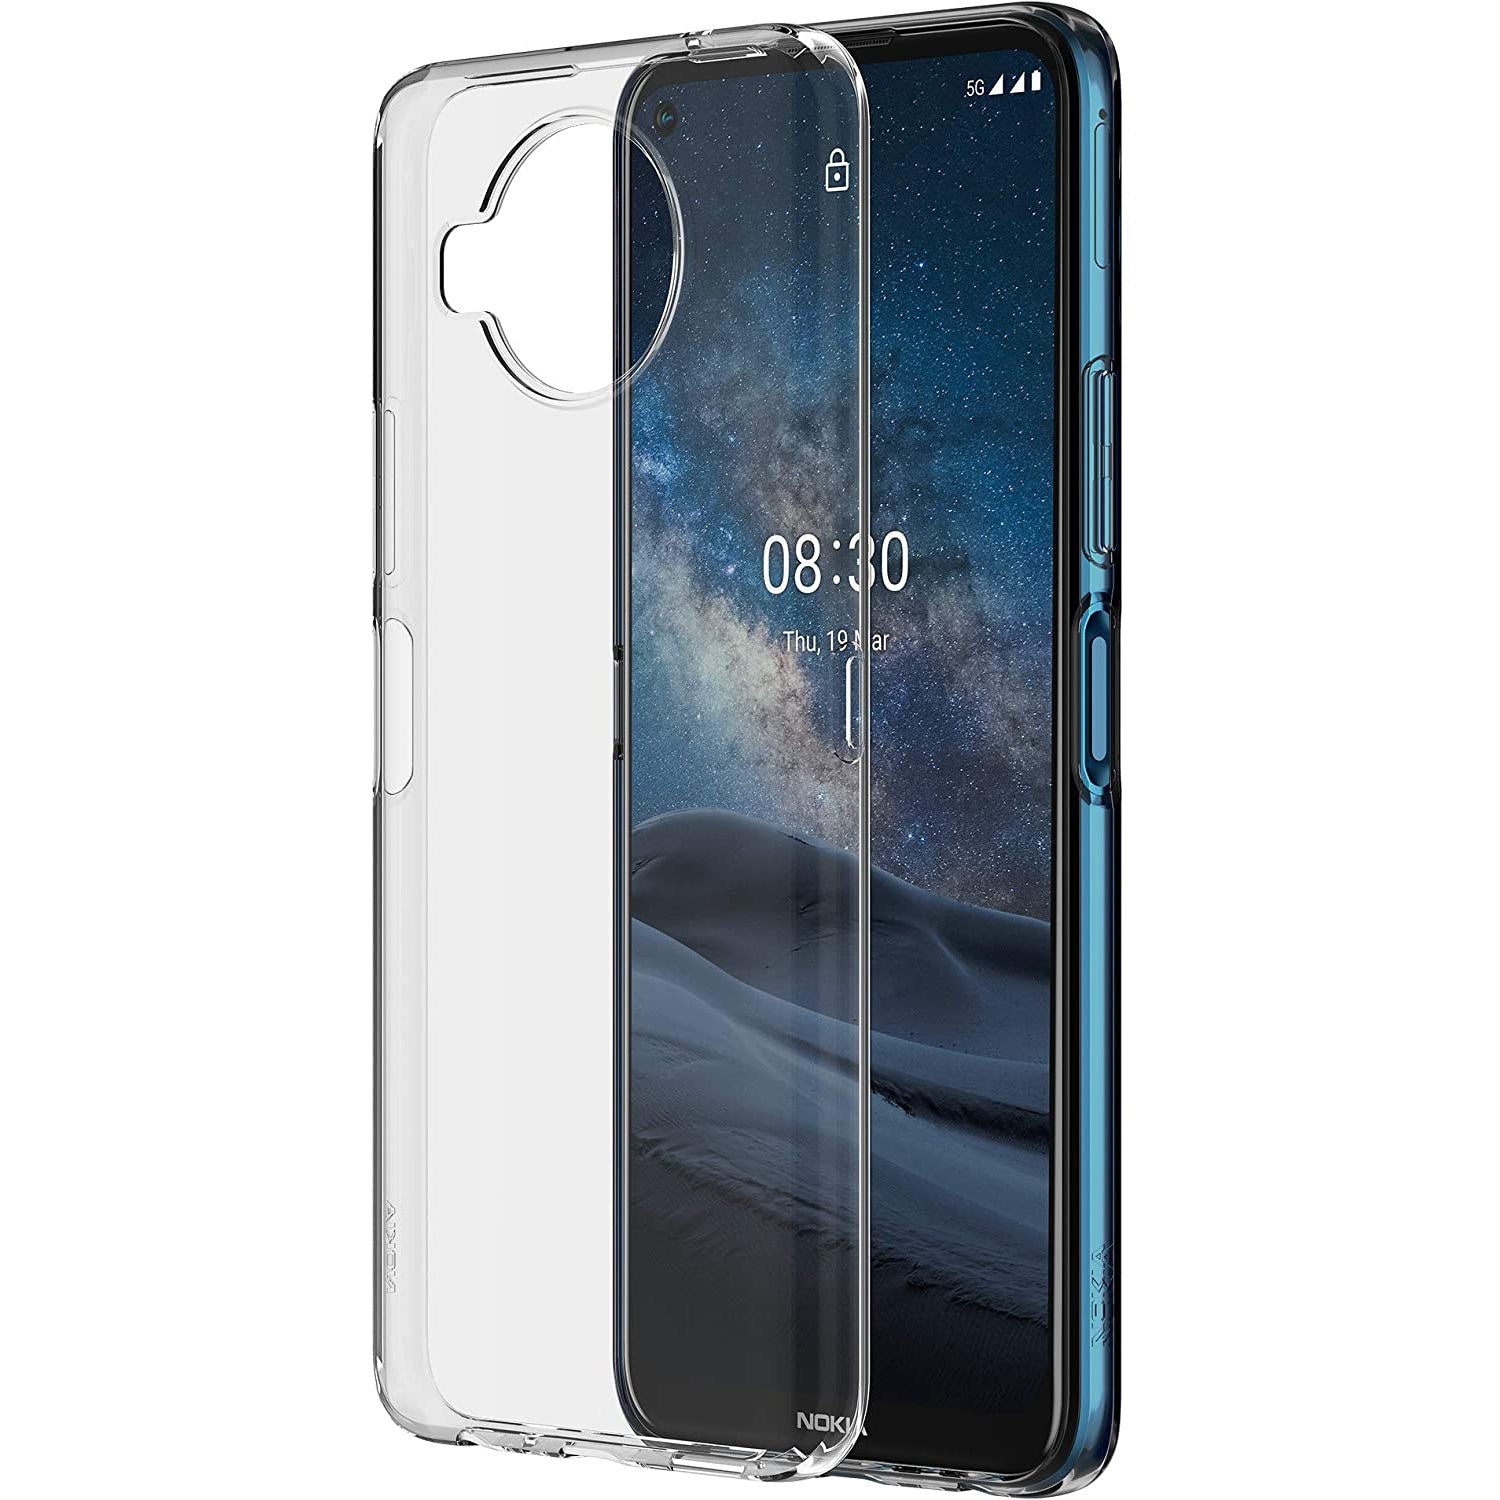 Nokia CC-183 Clear Phone Case Designed for Nokia 8.3 5G, Protective Phone Cover, Shockproof, Rounded Raised Edges